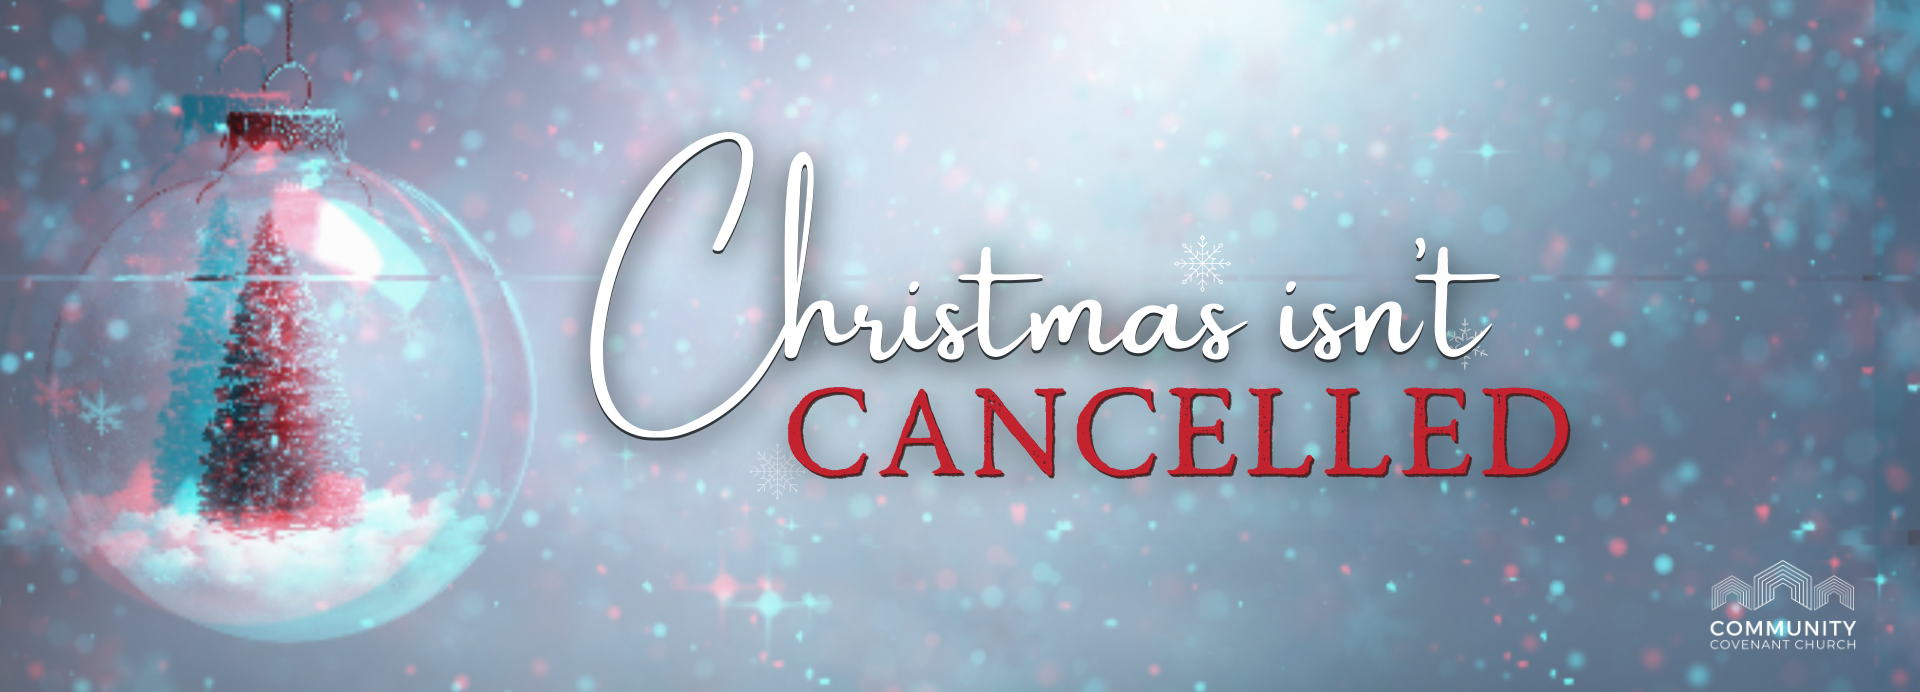 Christmas Isn't Cancelled - 1920 x 692.png